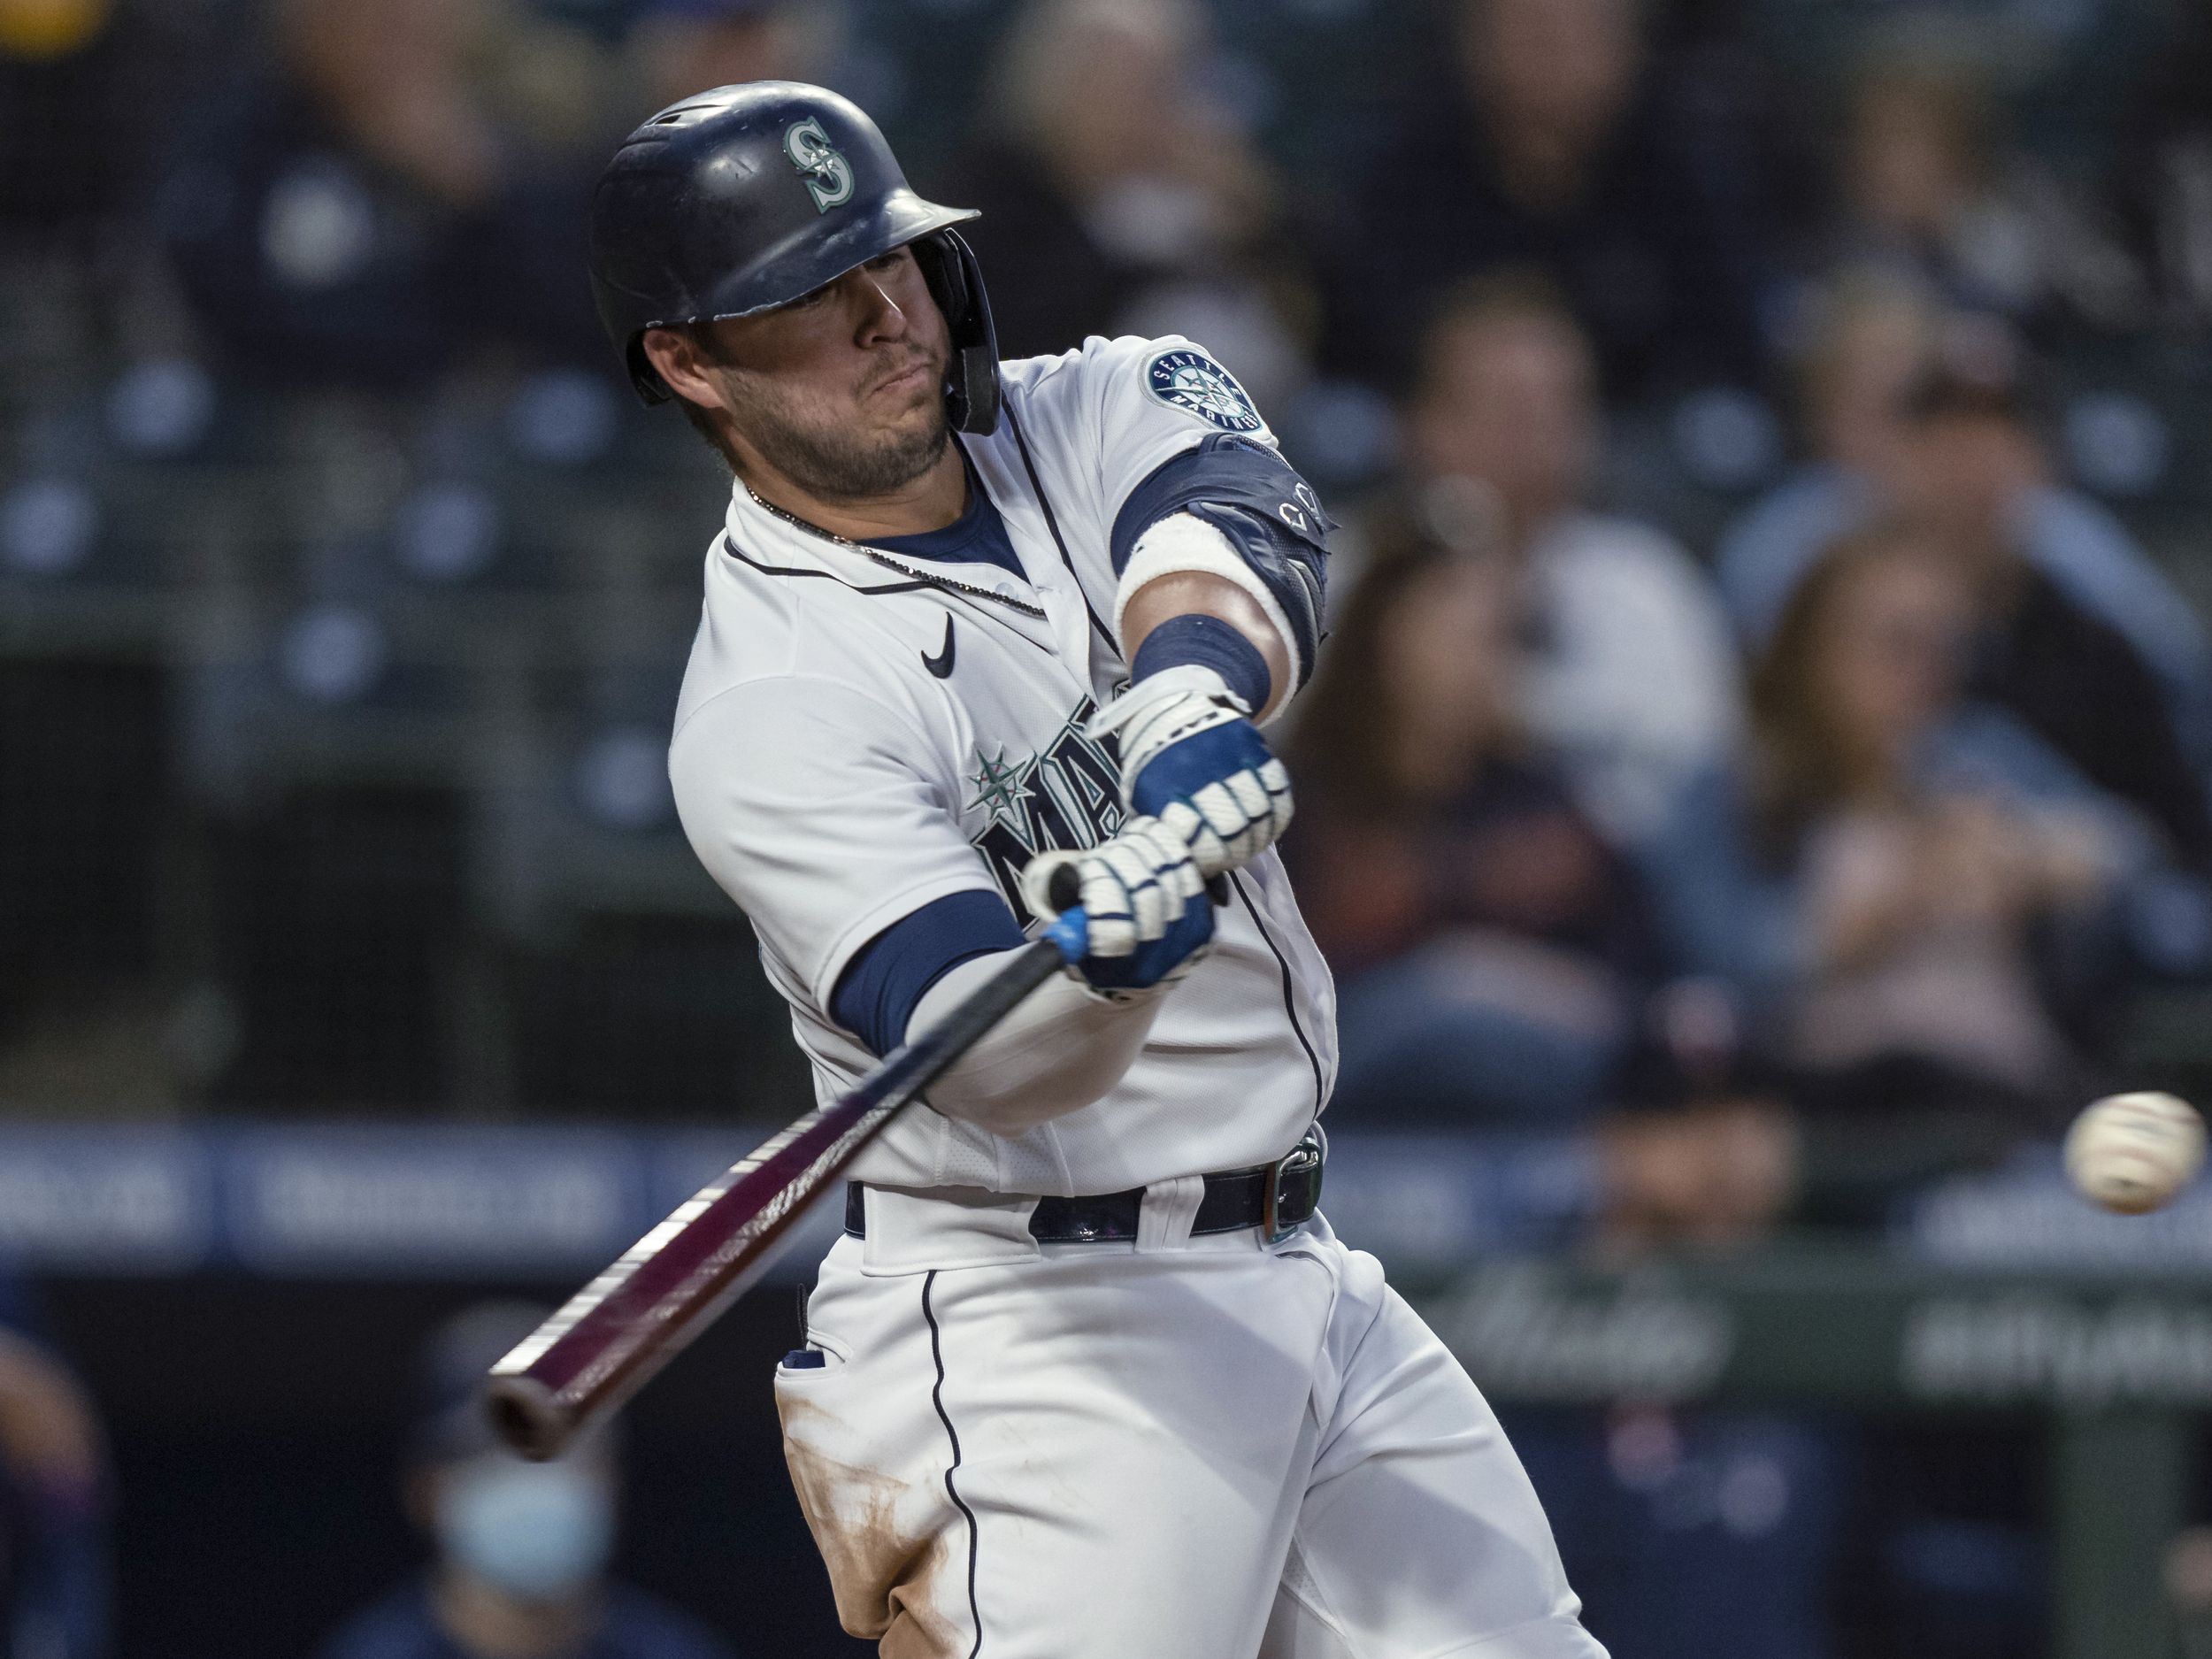 Hit a homer vs. getting hit by pitch? Ty France hopes to change those  trends for Mariners